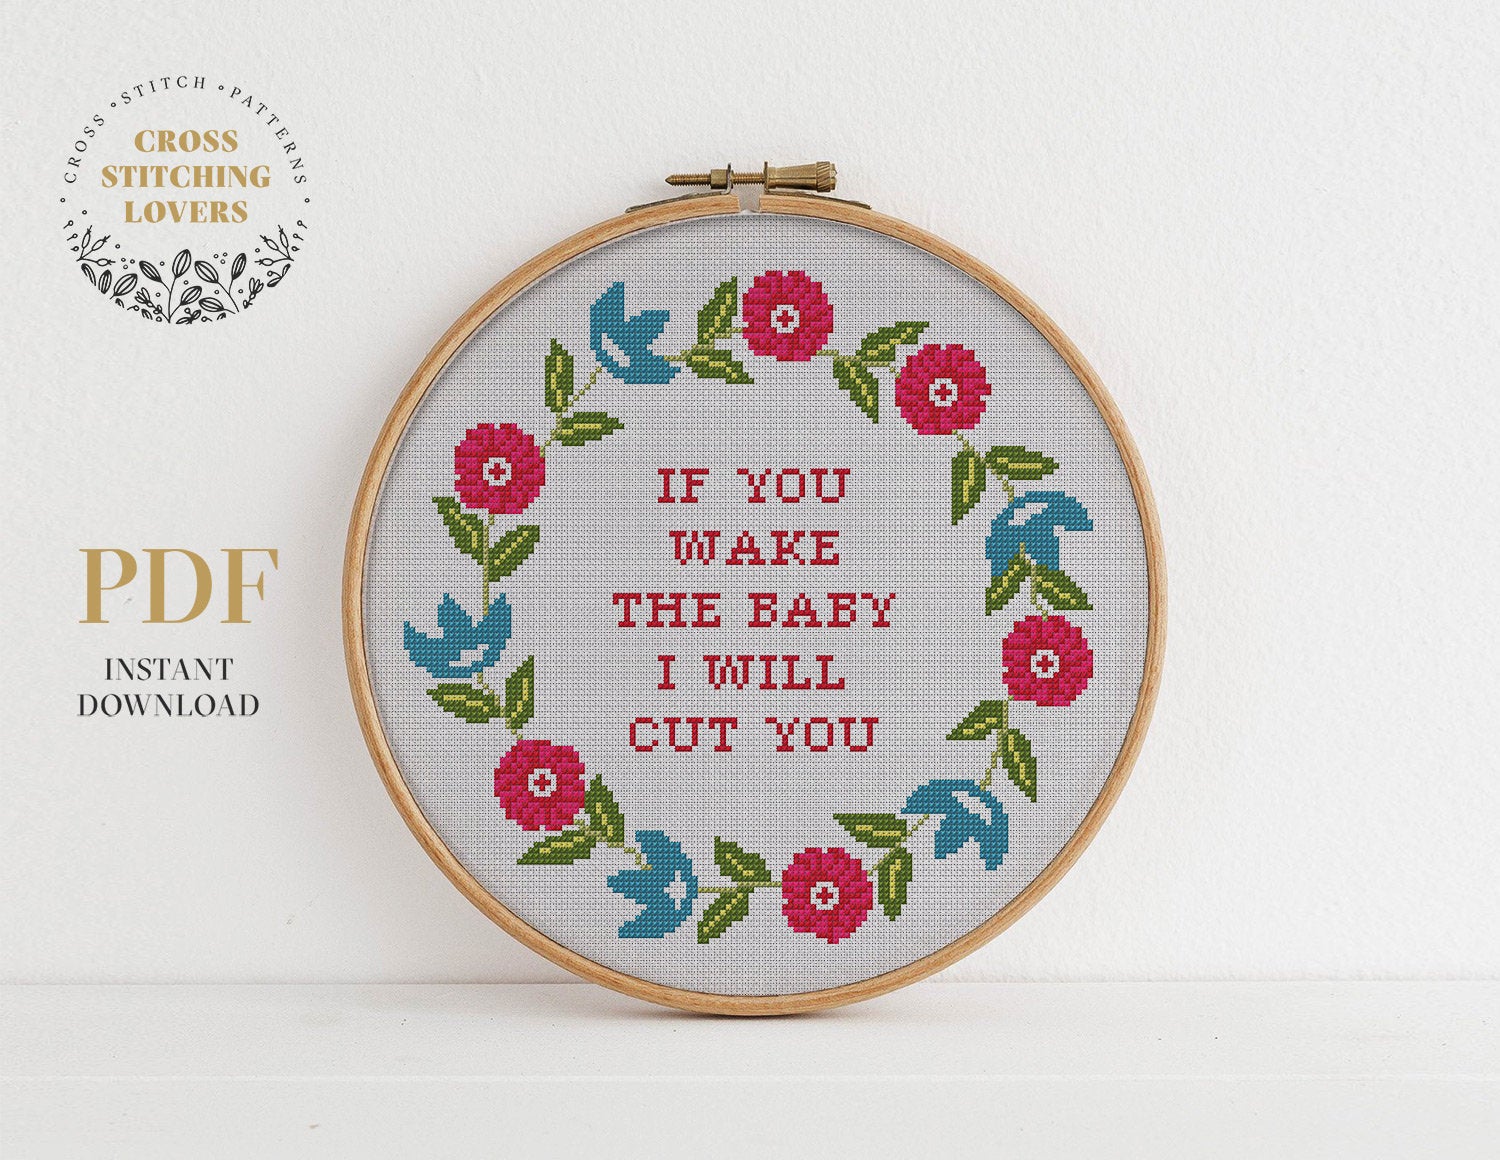 Funny "If you wake the baby I will cut you" - Cross stitch pattern